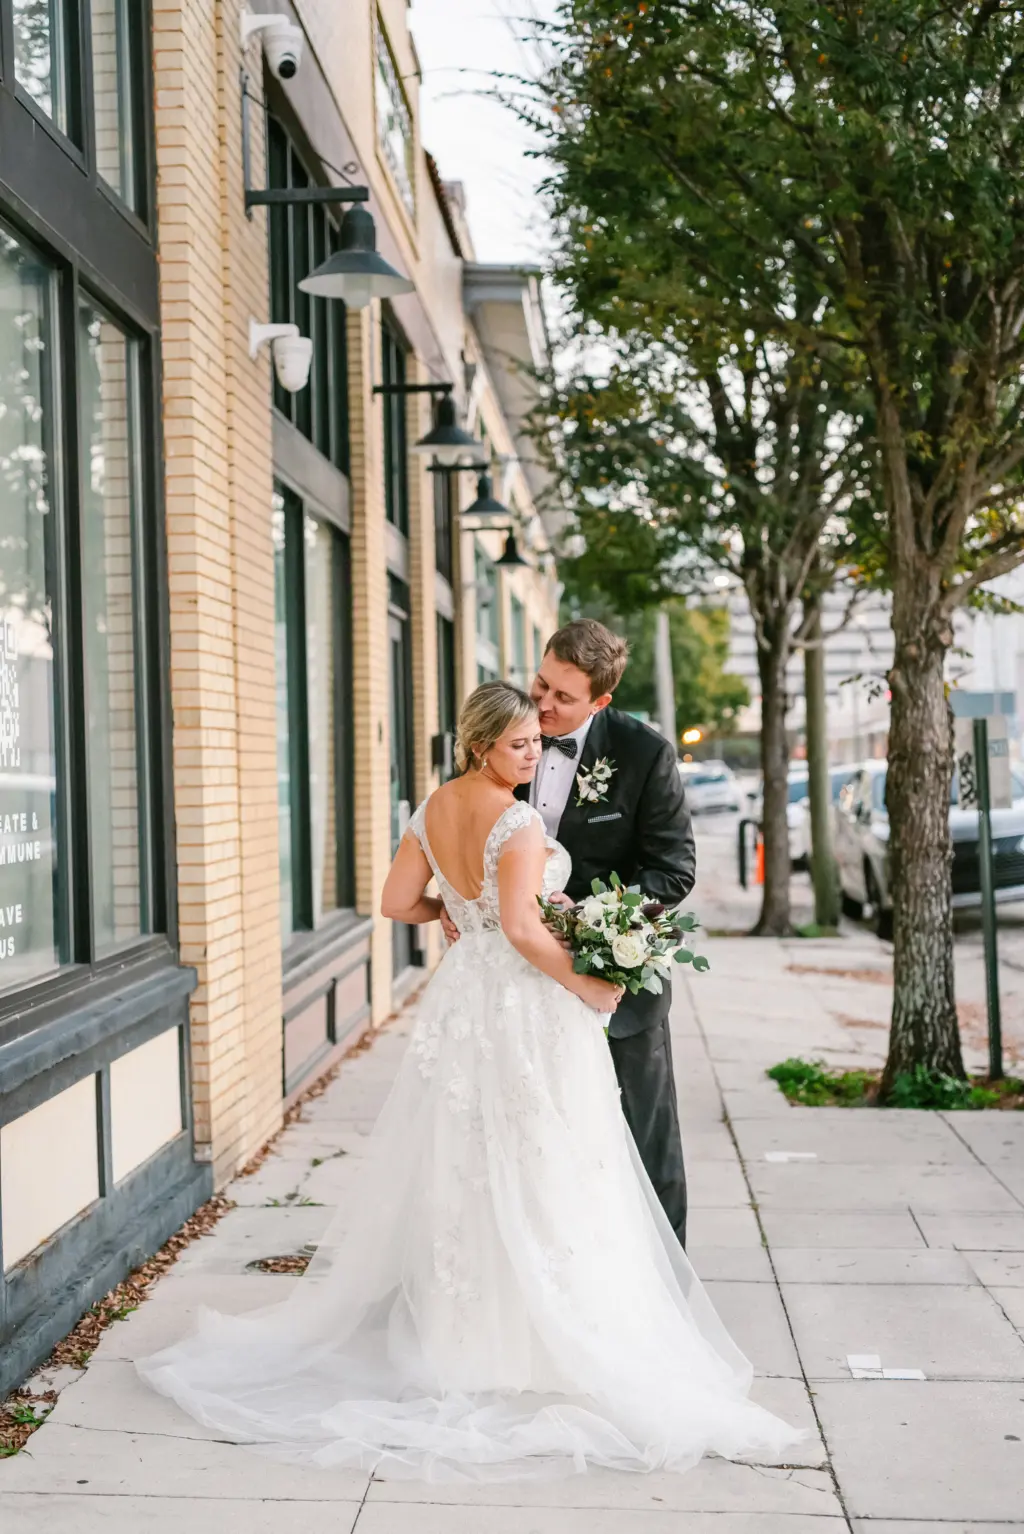 Bride and Groom Just Married Outdoor Wedding Portrait | Ivory Tulle and Lace Deep V Neckline A-Line Sheer Cap Sleeve Wedding Dress Ideas | Tampa Bay Hair and Makeup Artist Femme Akoi Beauty Studio